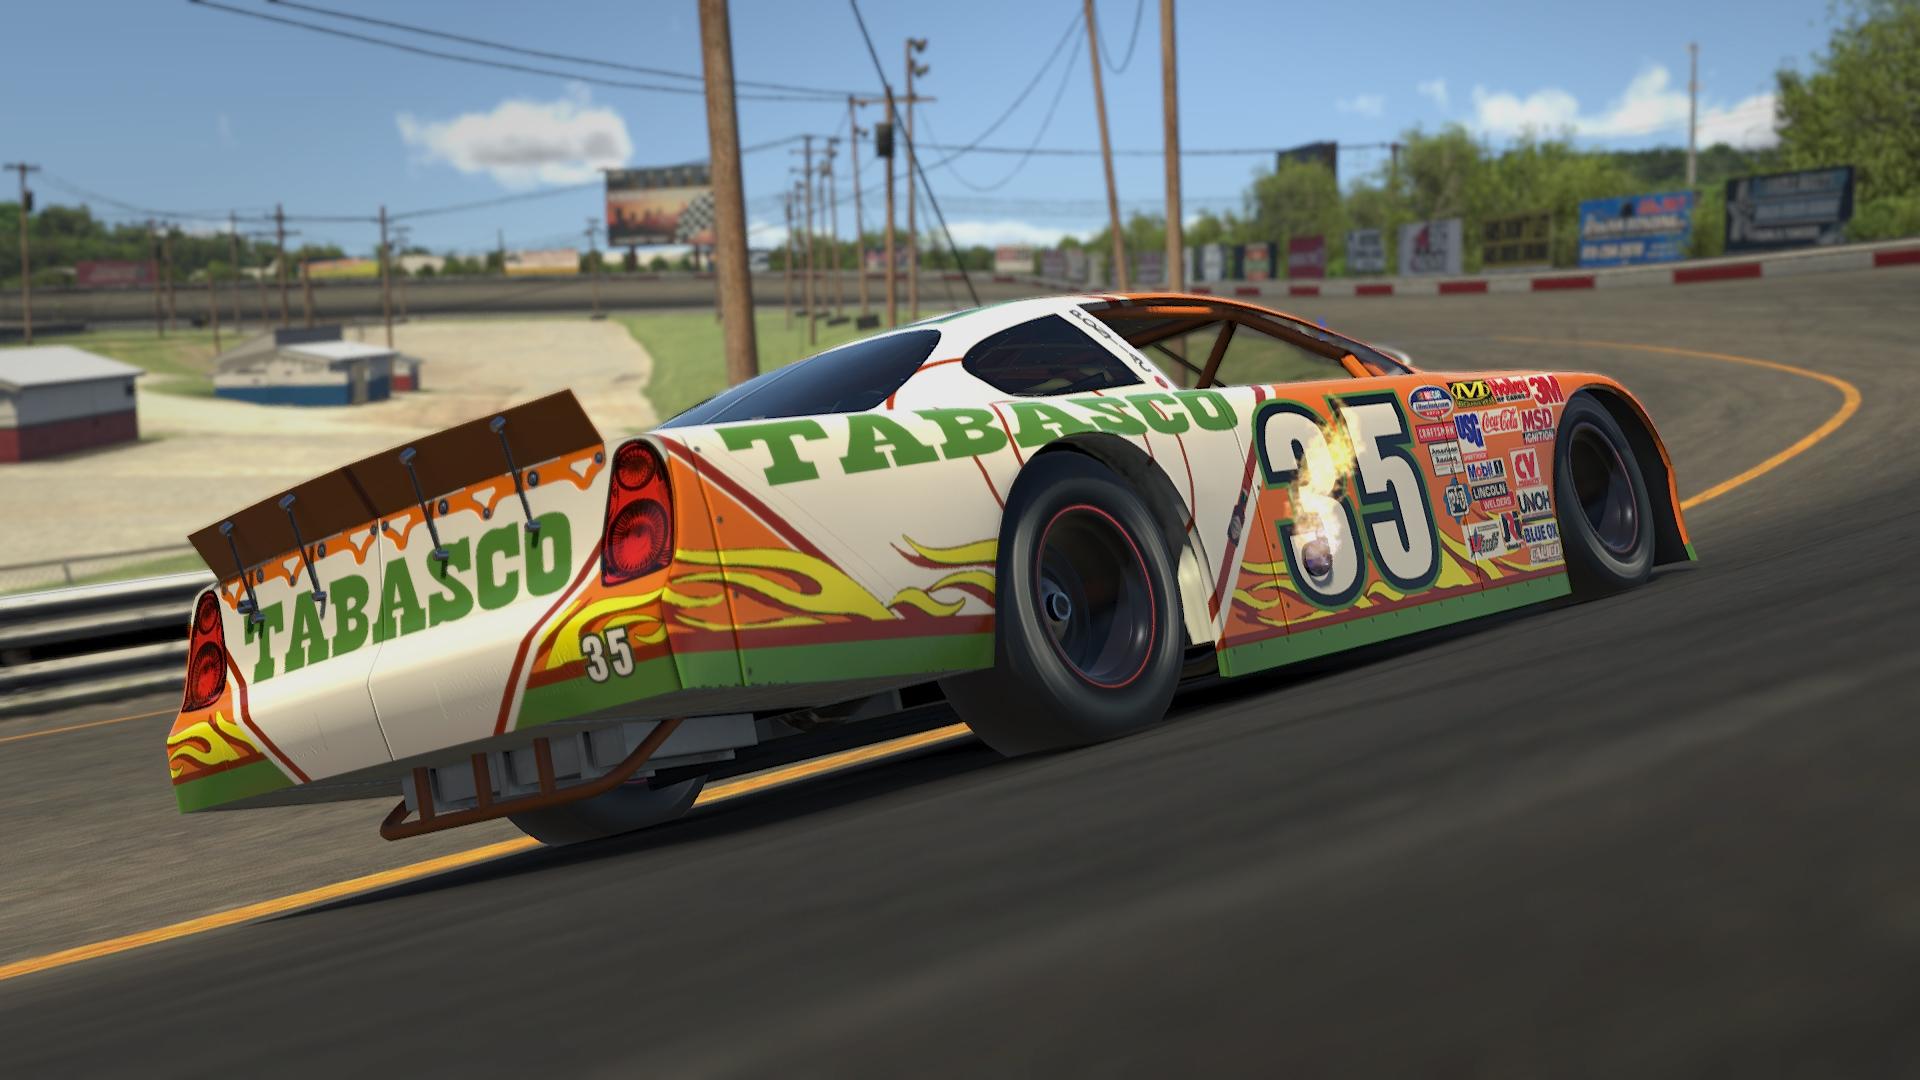 Preview of Todd Bodine #35 Tabasco ISM Racing Chevrolet Monte Carlo SS by Ethan Leimann